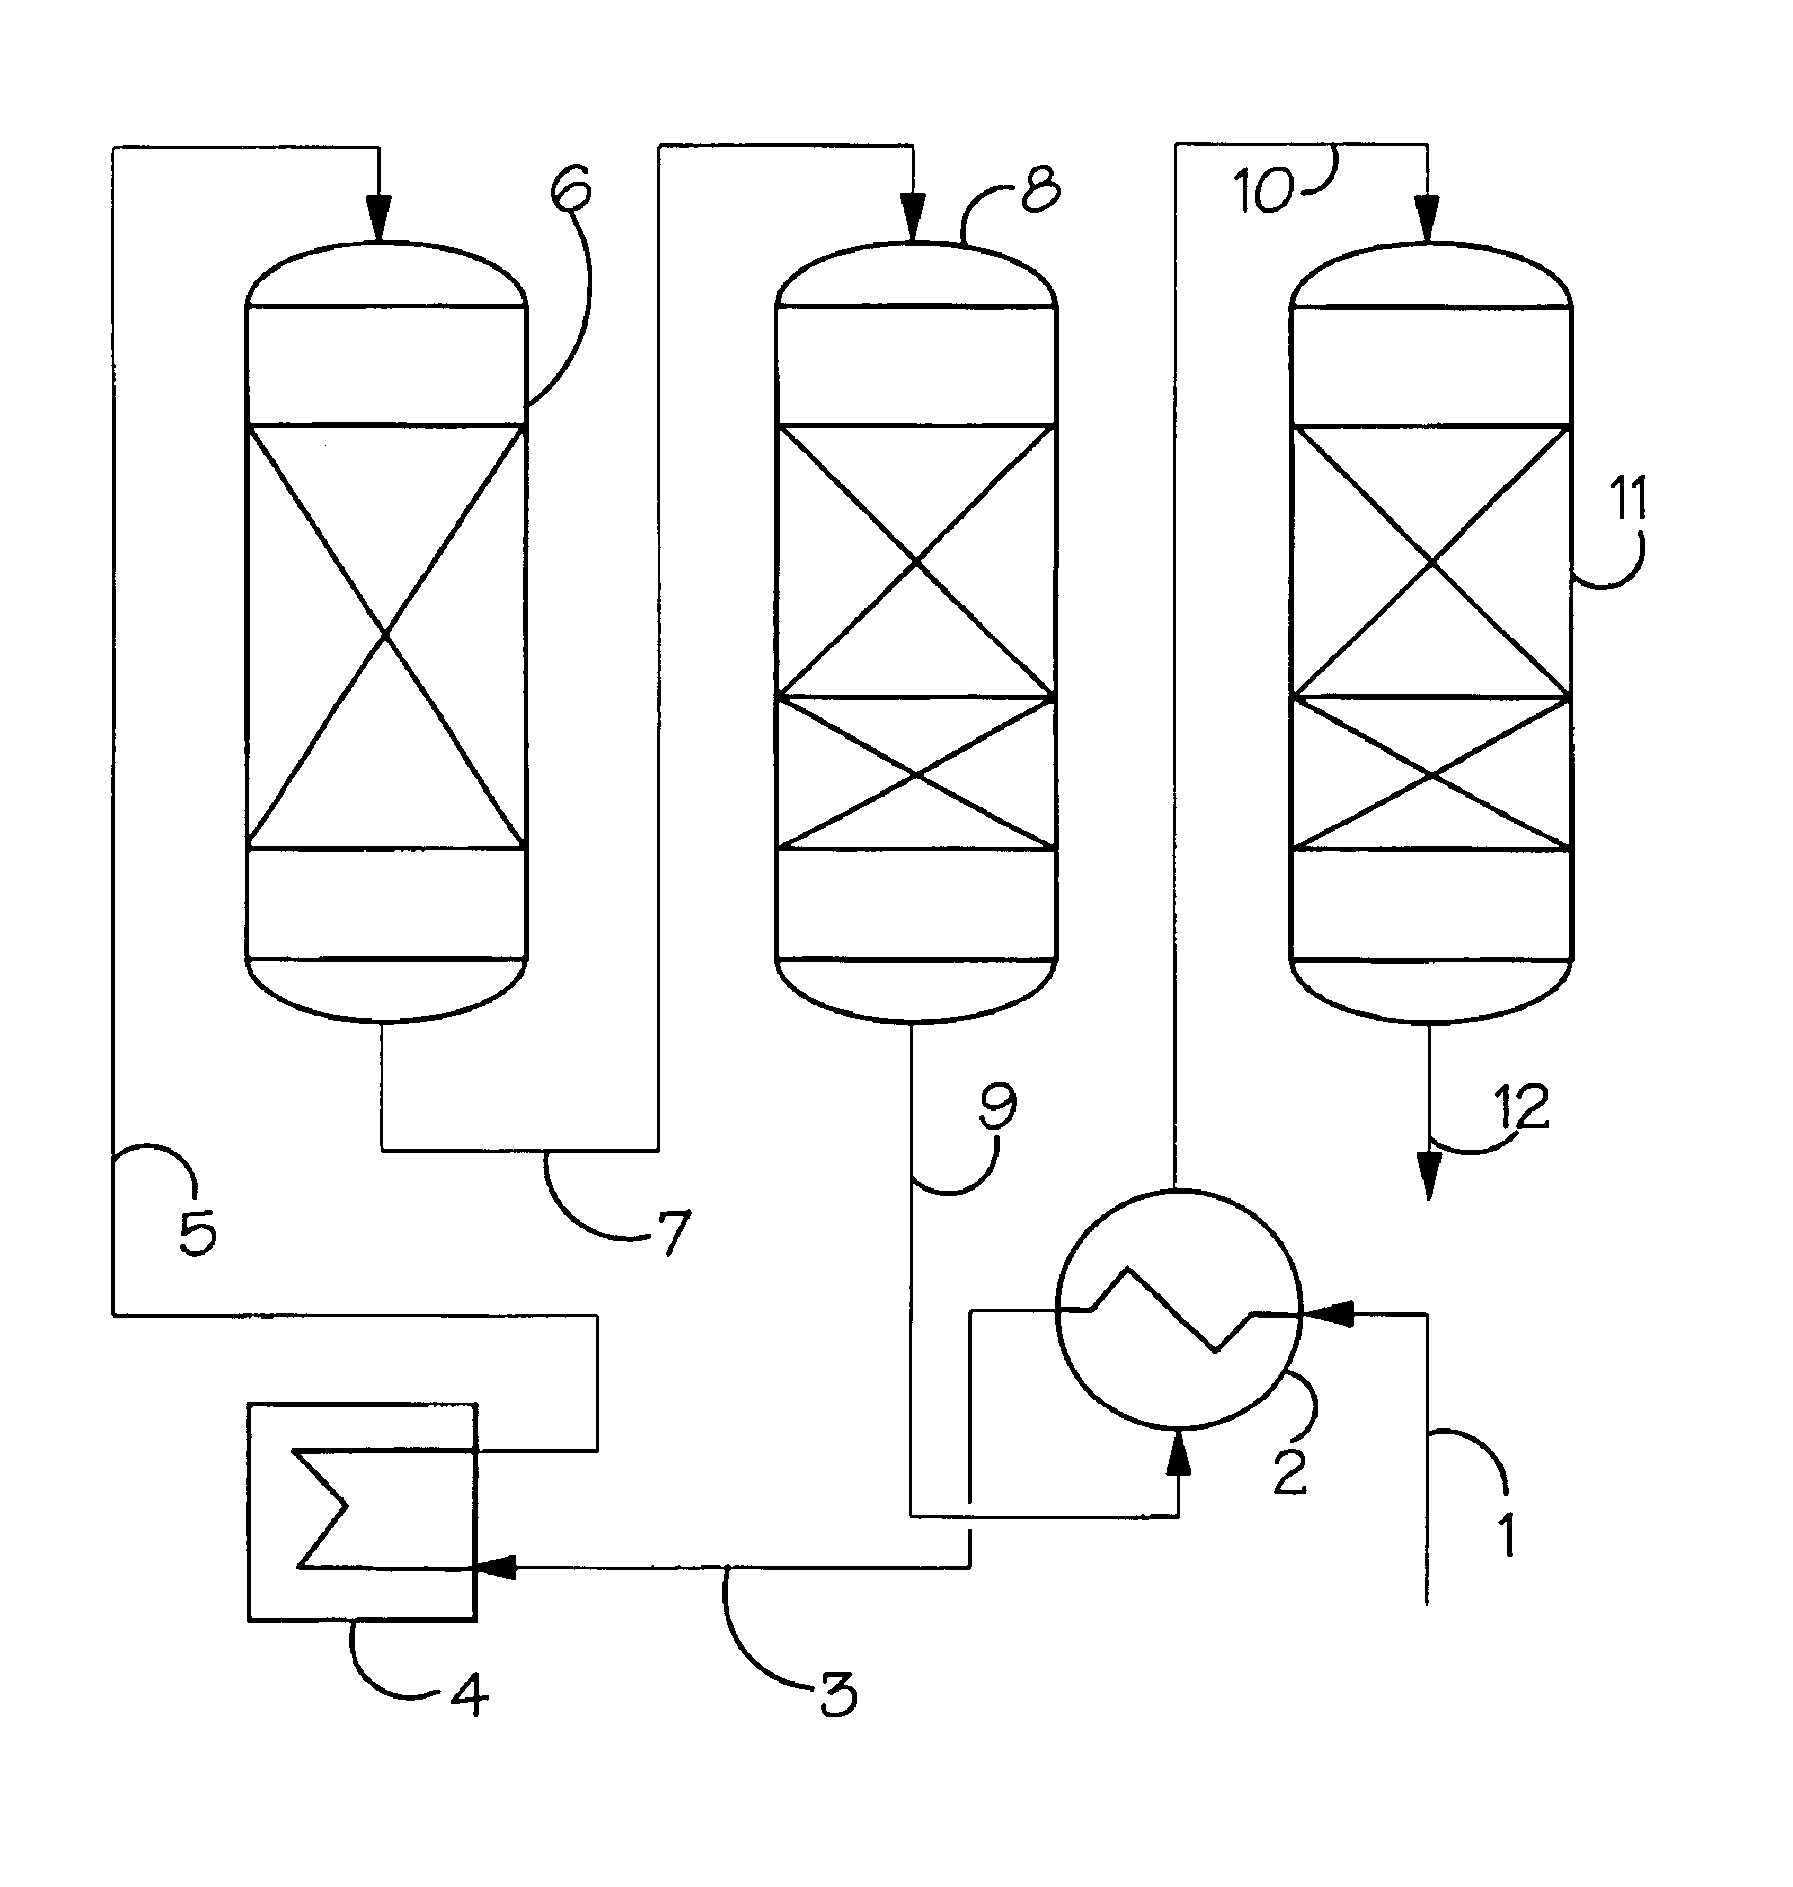 Process for the desulphurization of feed streams